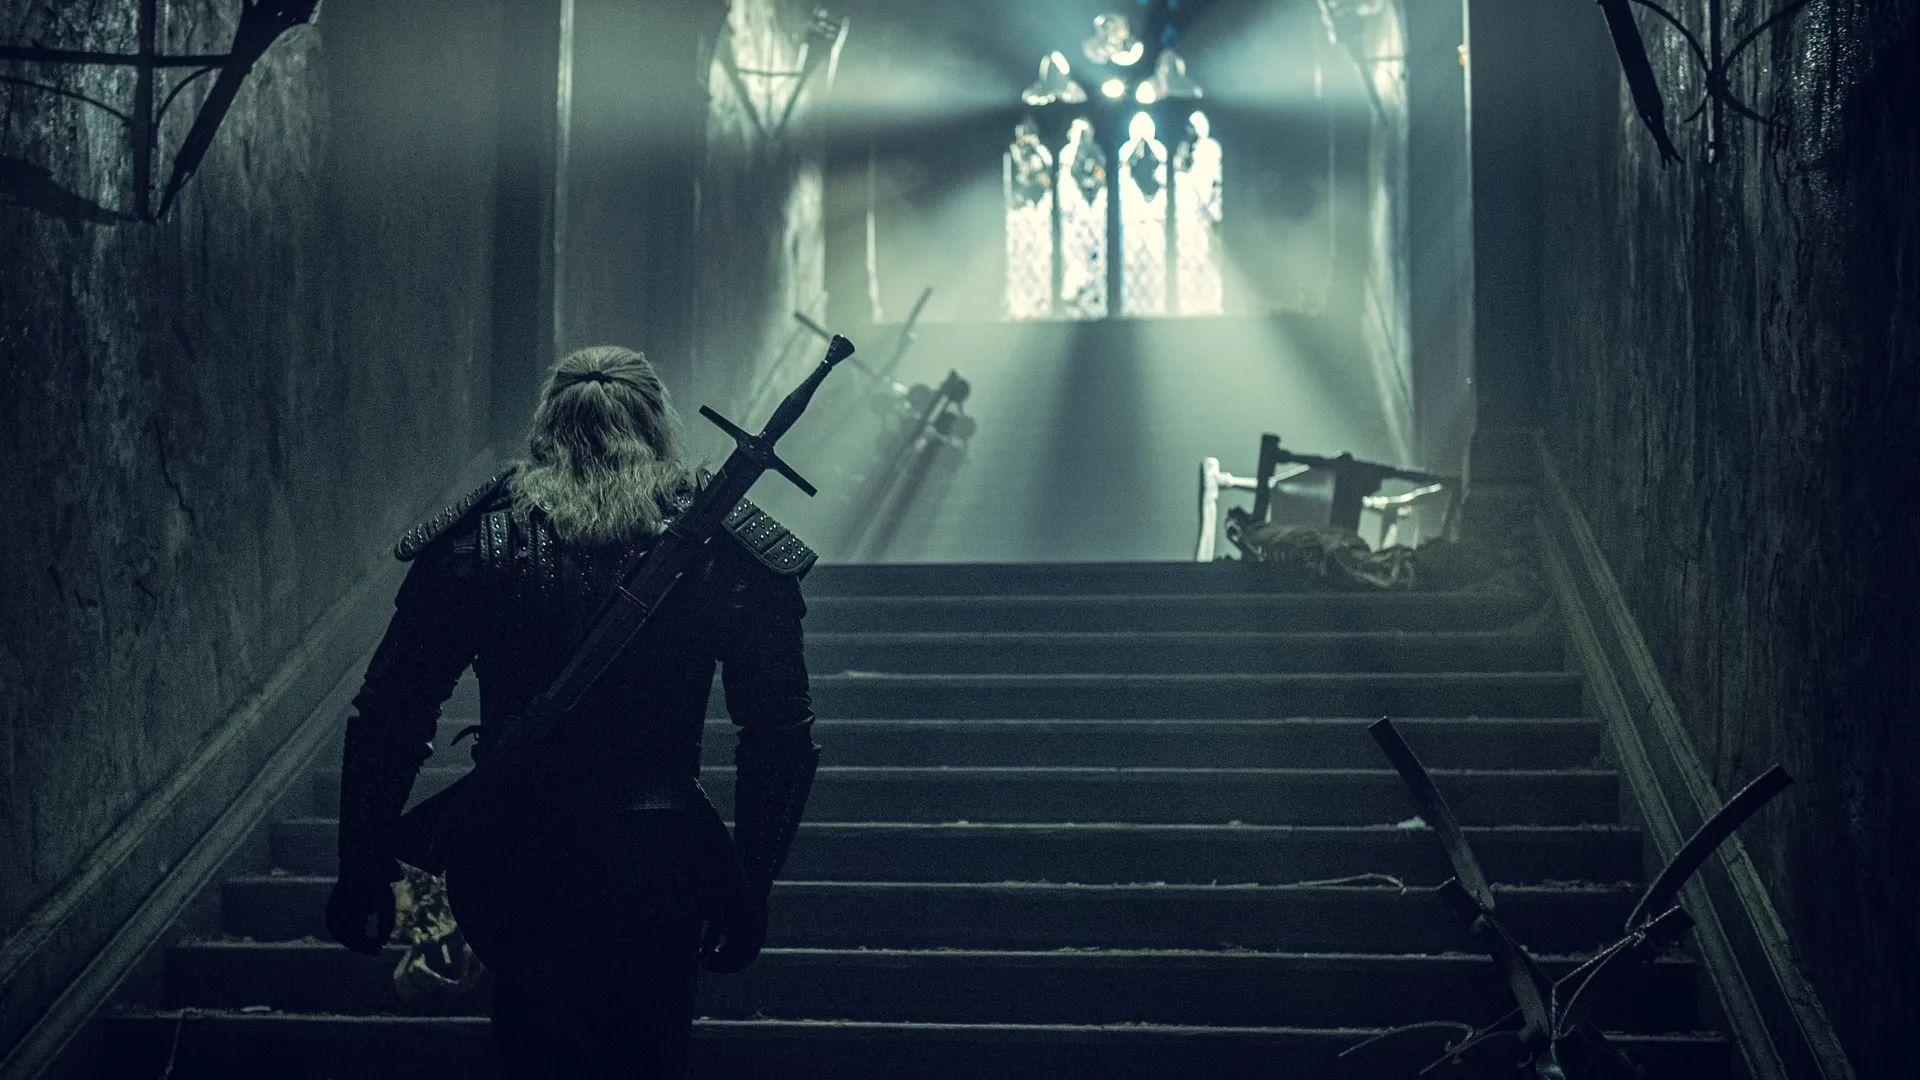 Netflix's The Witcher corridor shot with Geralt of Rivia back turned to camera